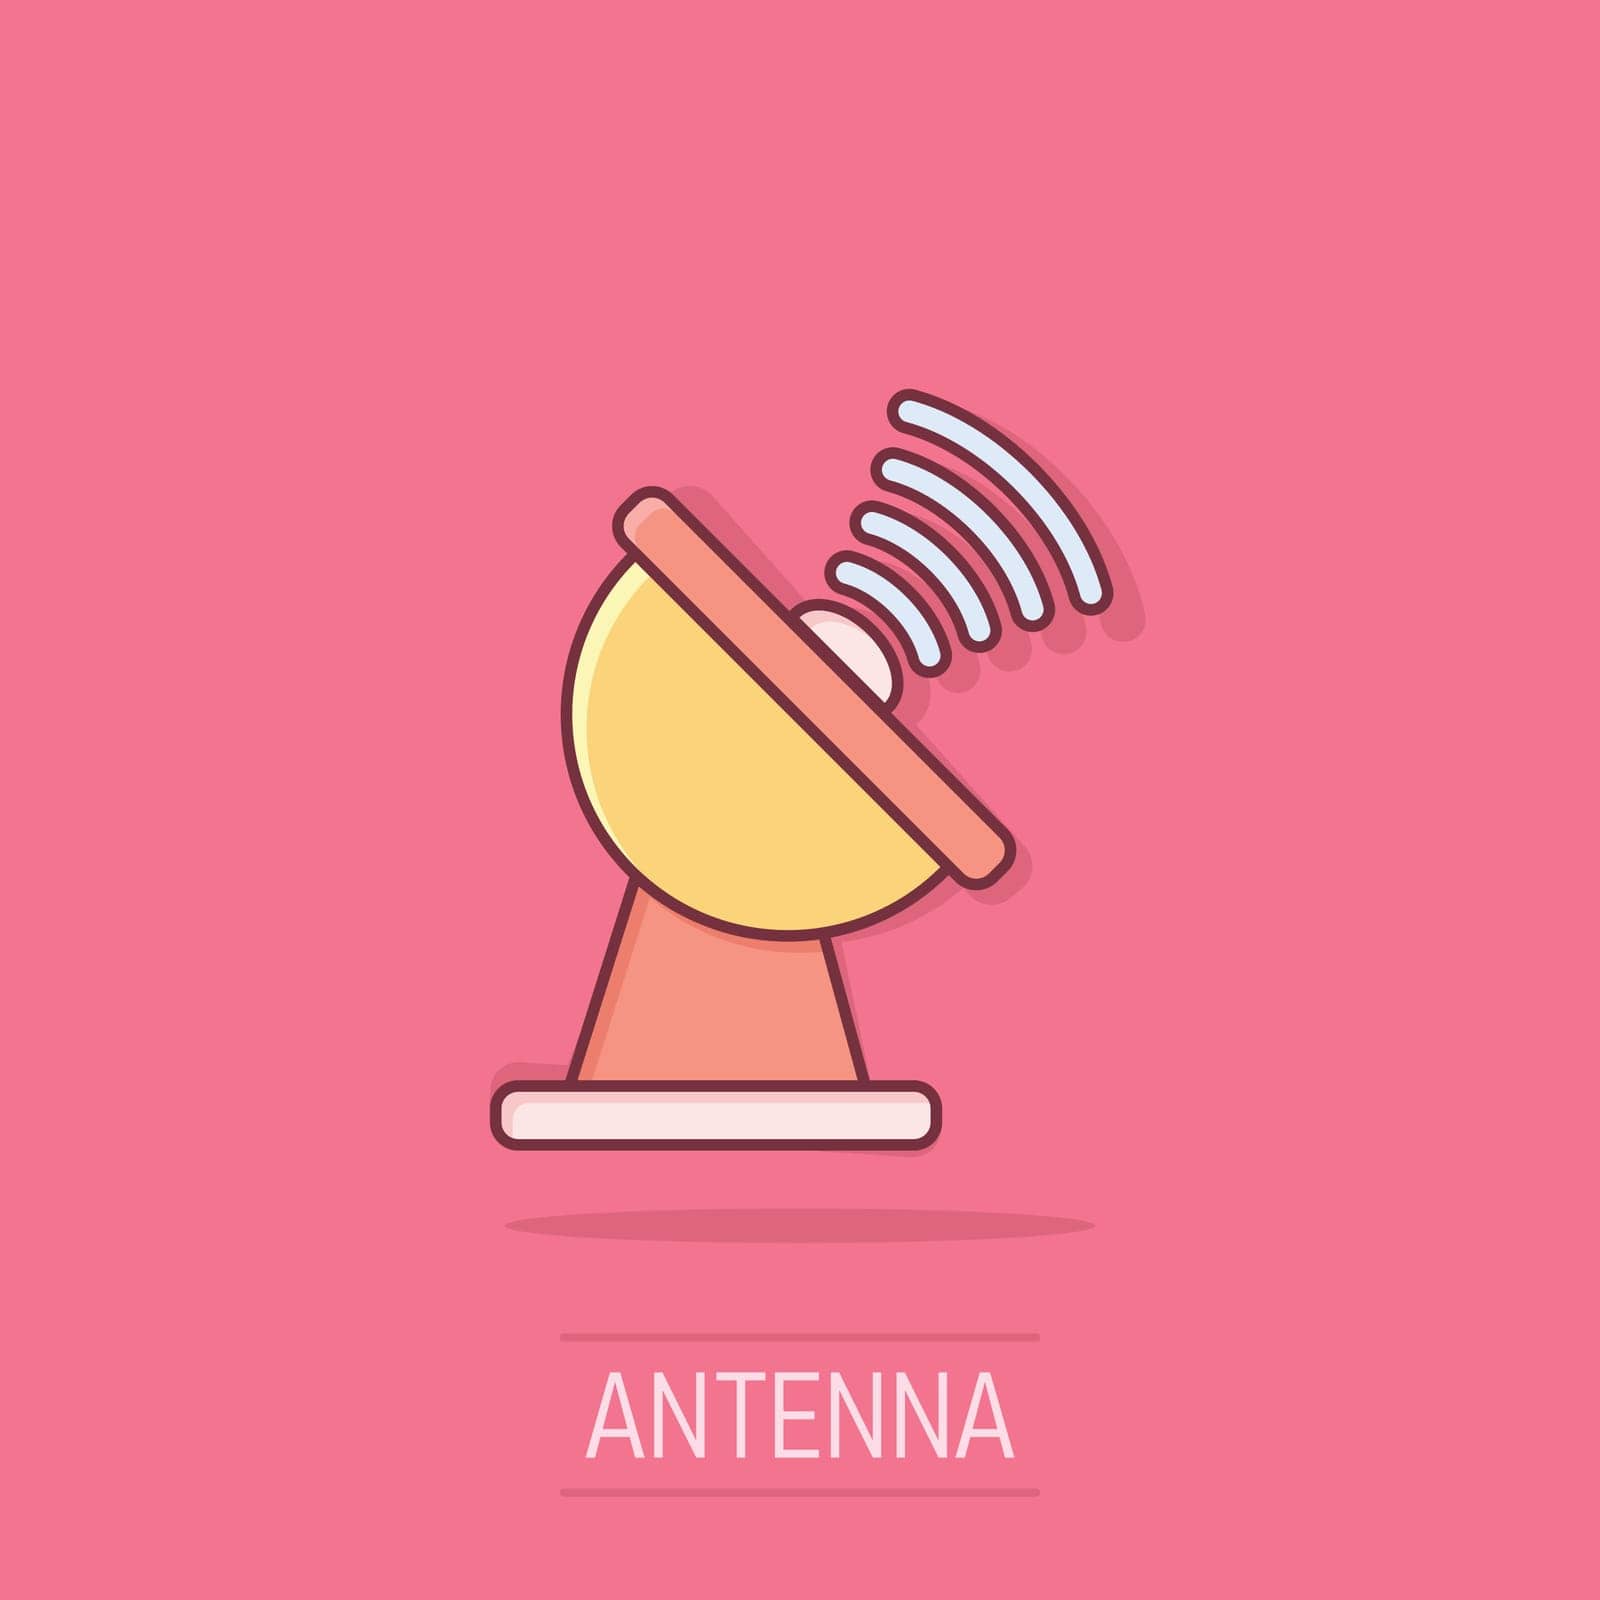 Satellite antenna tower icon in comic style. Broadcasting cartoon by LysenkoA